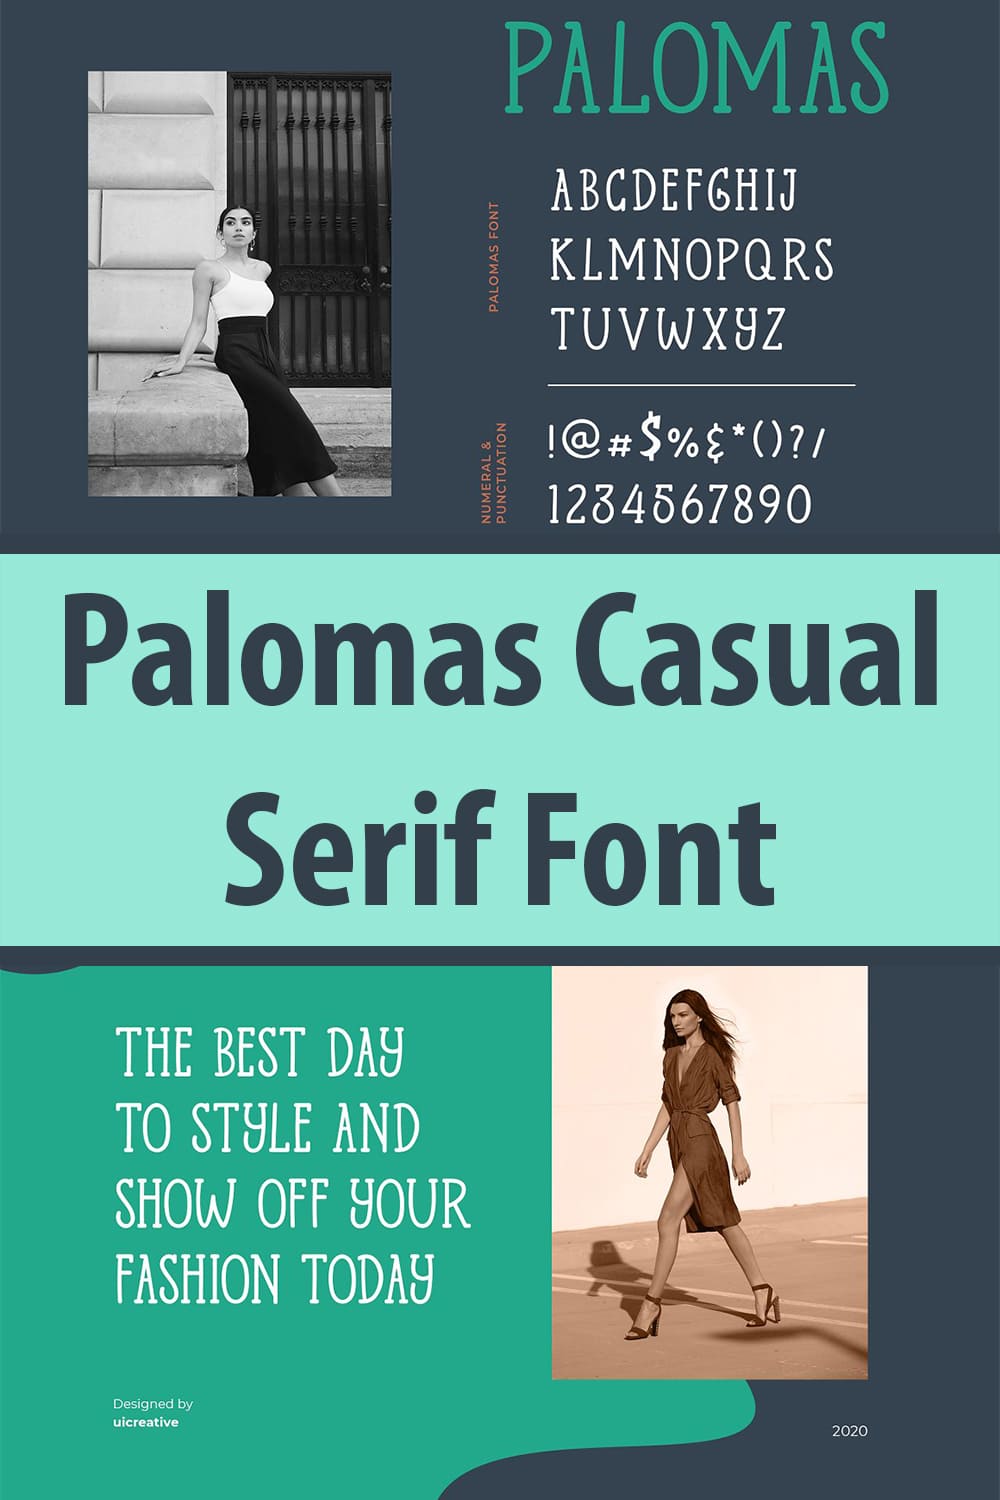 Palomas Casual Serif Font Preview - "The Best Day To Style And Show Off Your Fashion Today".